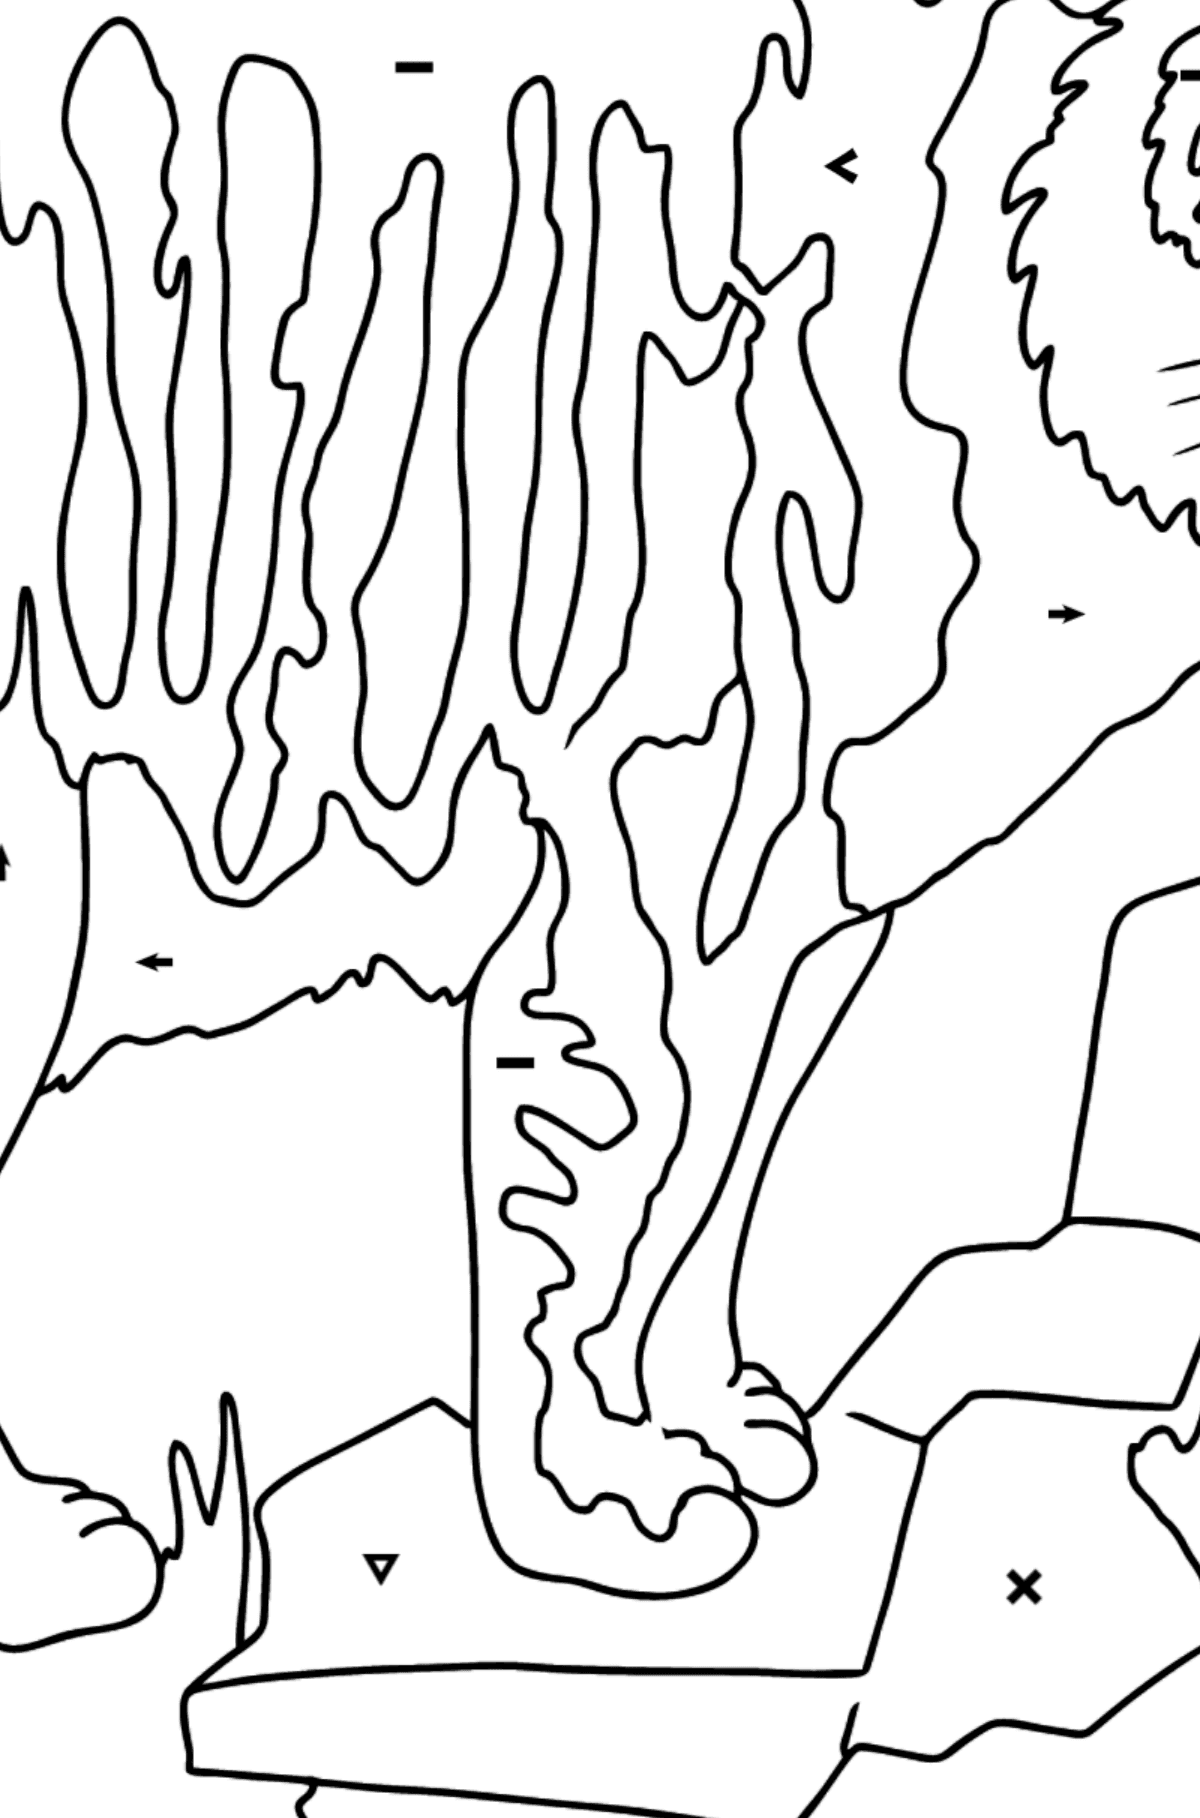 Coloring Page - A Tiger is Looking for Prey - Coloring by Symbols for Kids